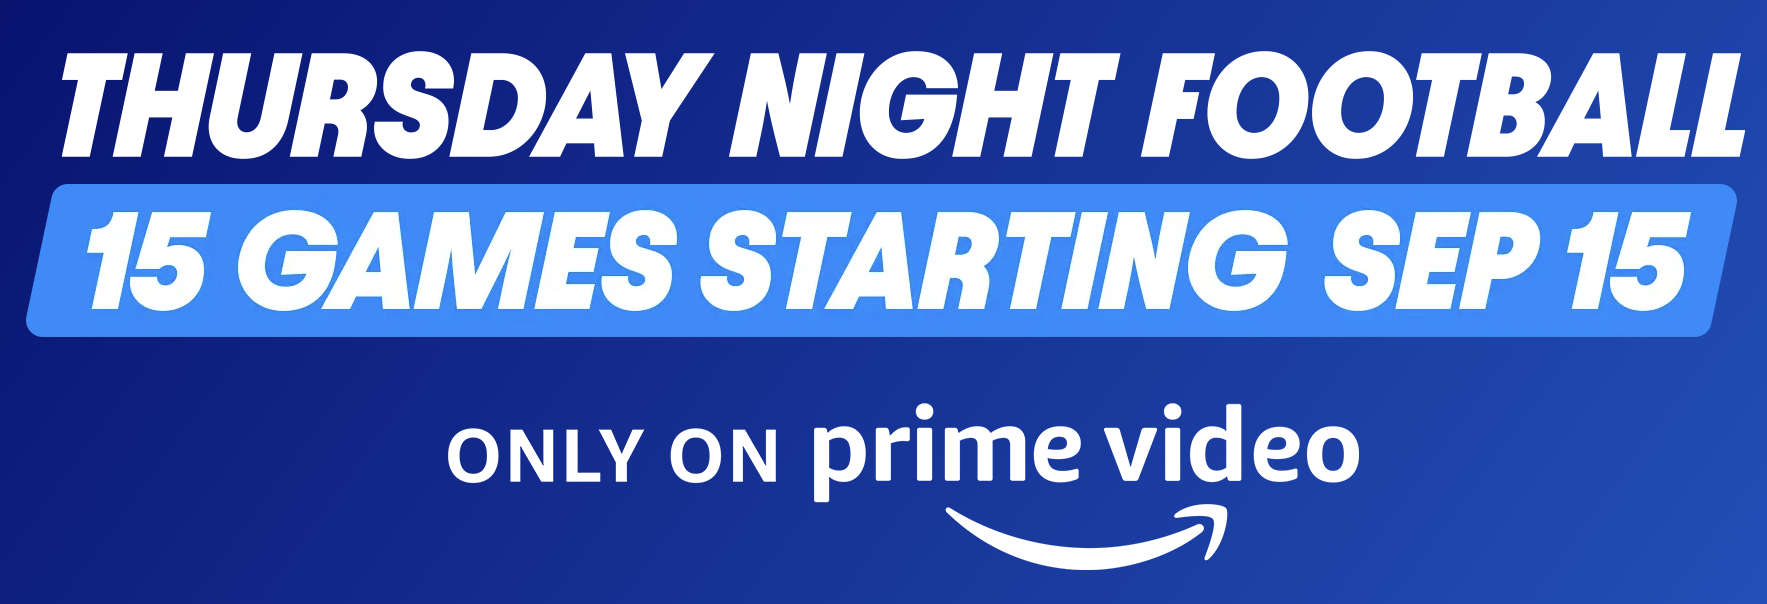 Thursday Night Football Gets Amazon a Record Number of New Prime Subscribers